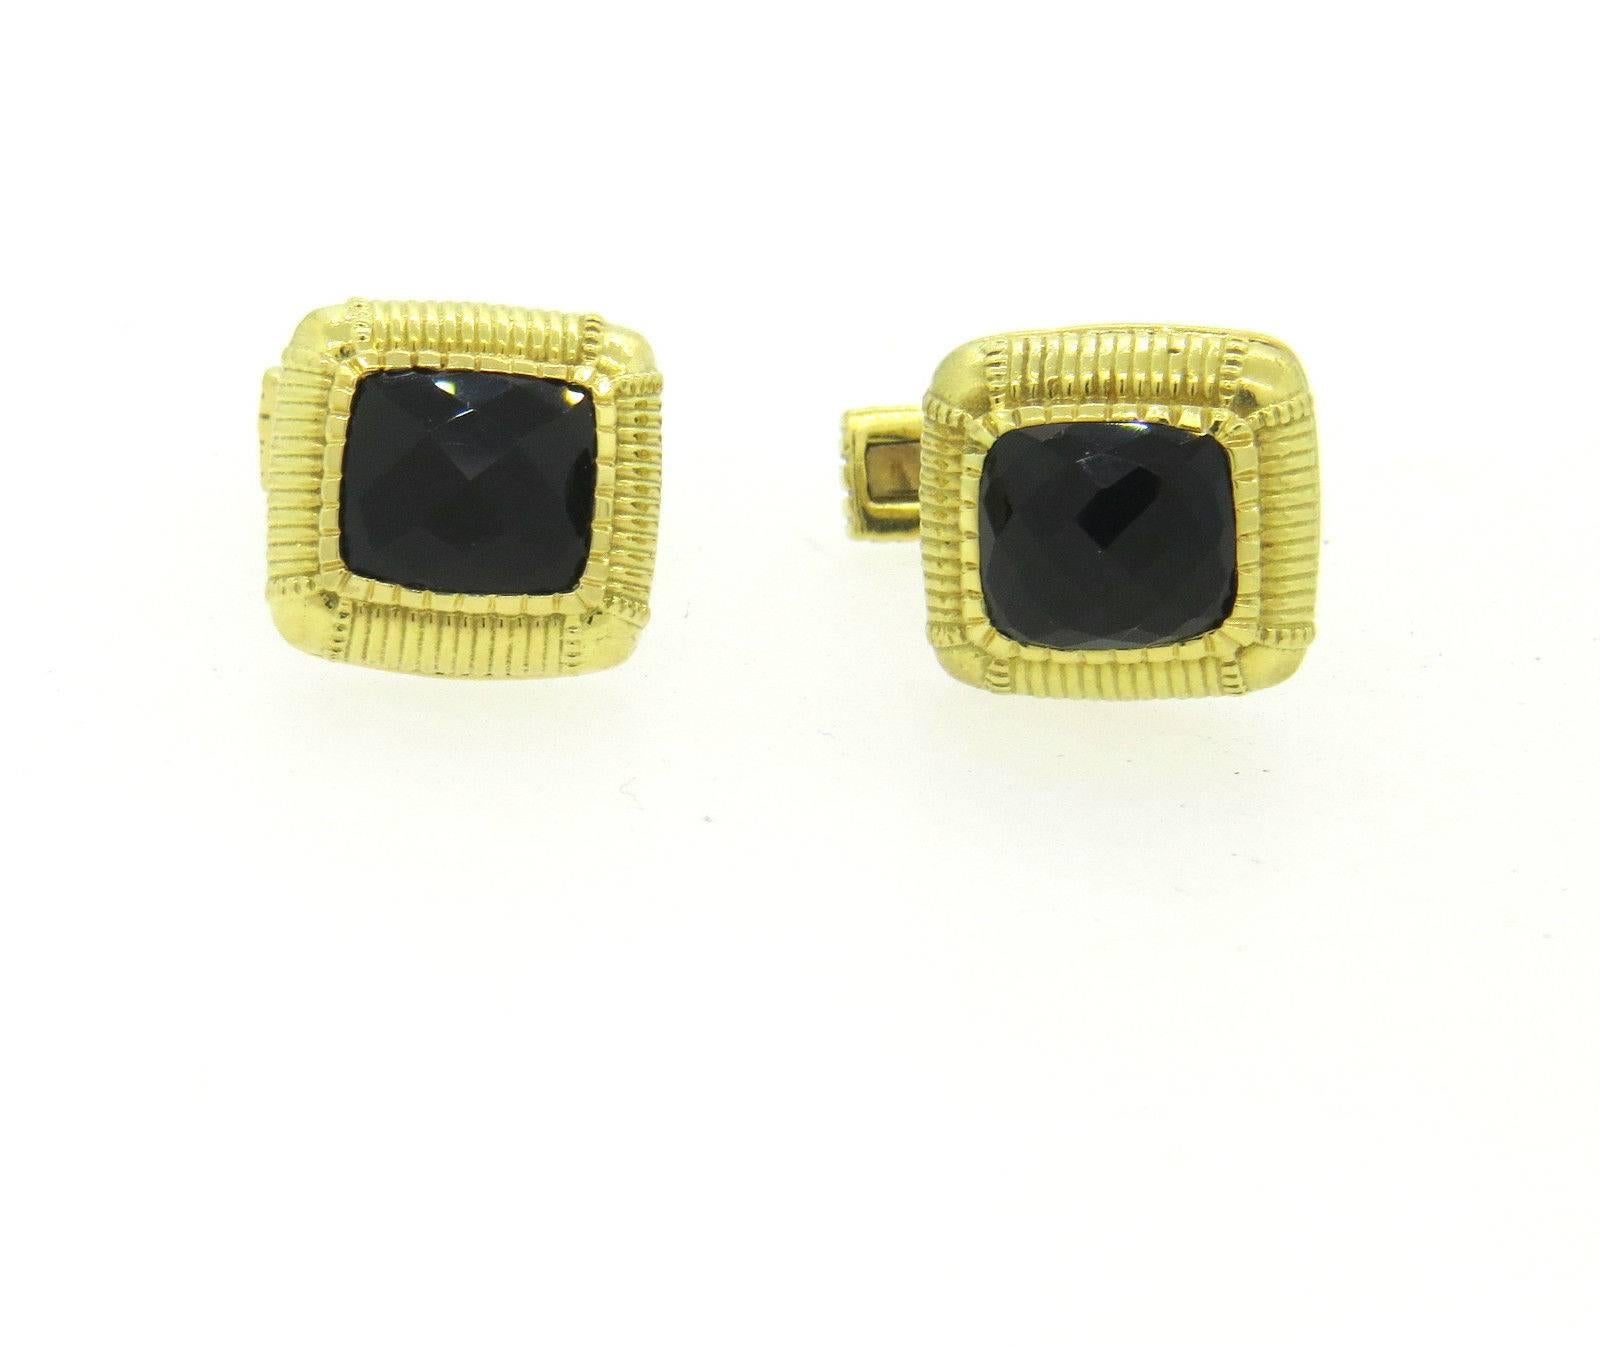 Pair of 18k yellow gold cufflinks, crafted by Judith Ripka, set with smokey quartz in the center. Each top measures 13mm x 14mm . Marked: Judith Ripka 18k. Weight - 15.1 grams 